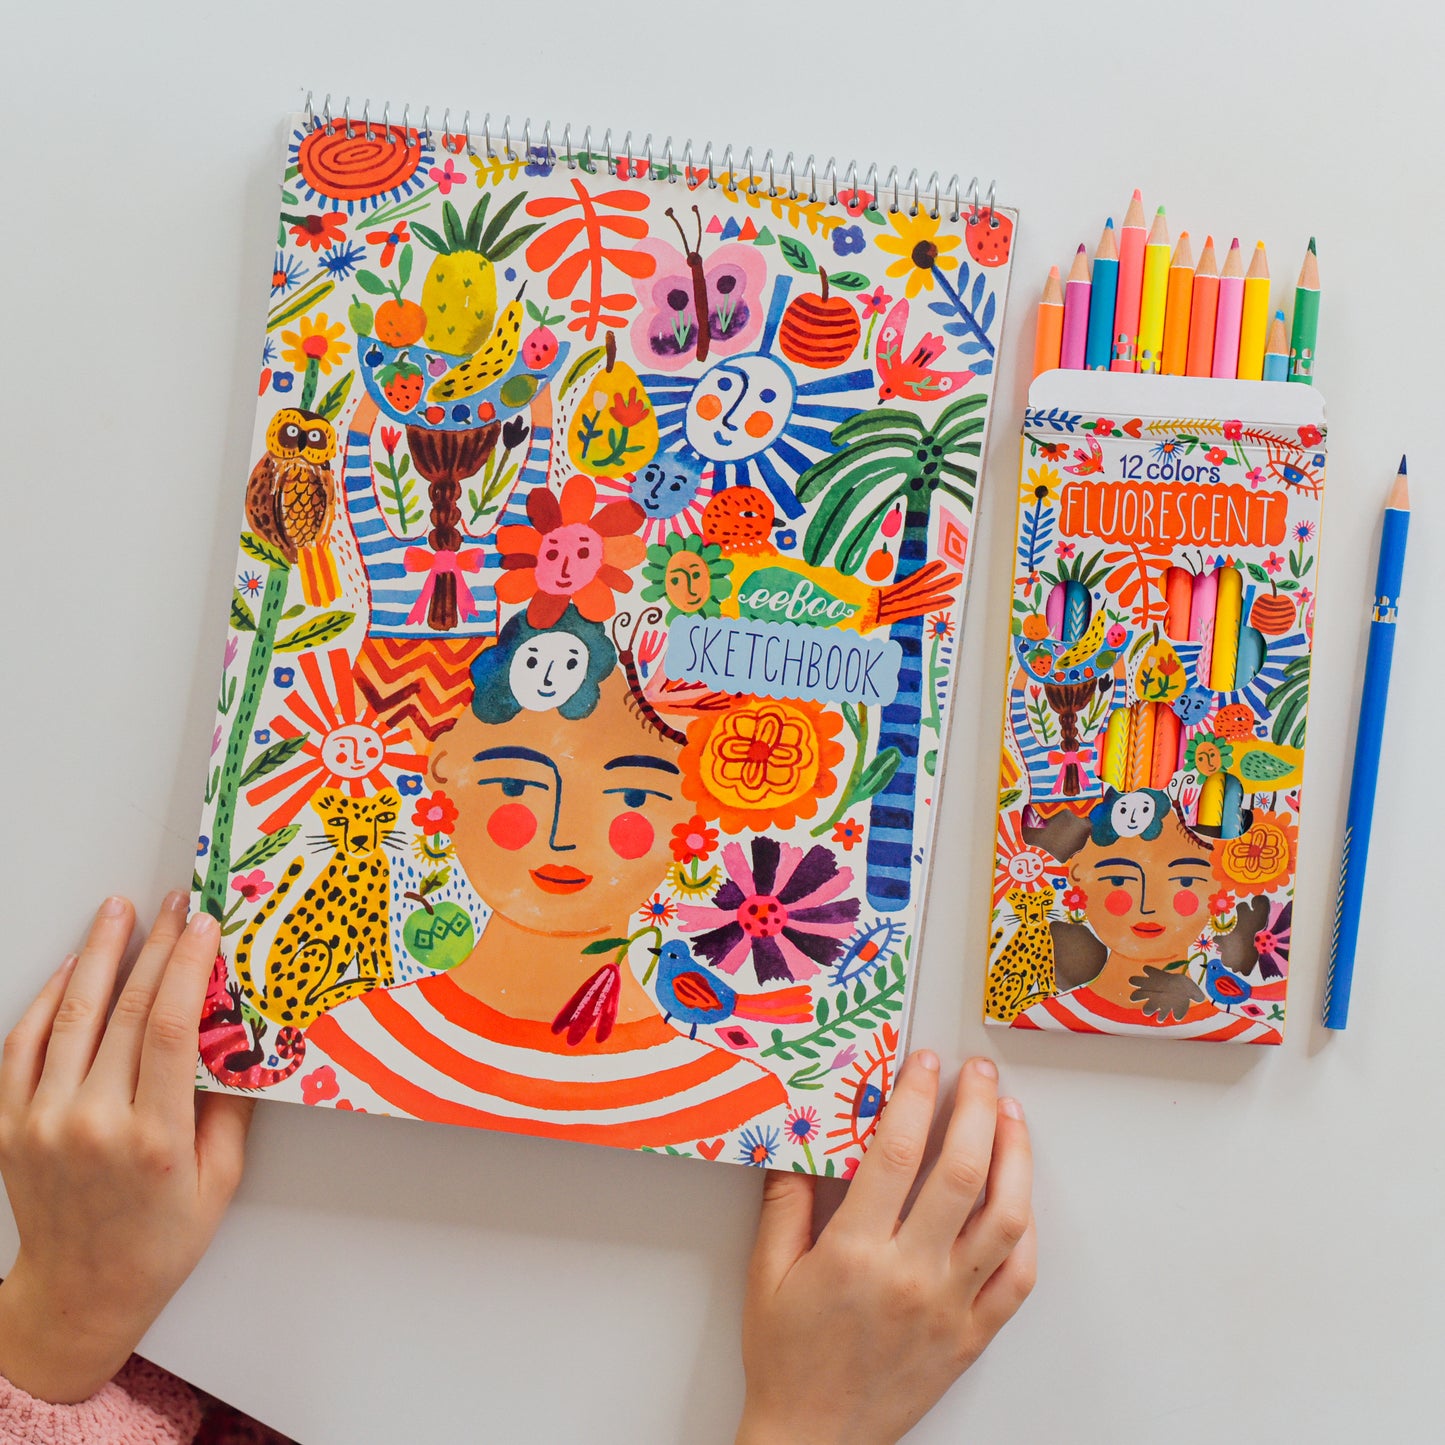 Positivity 12 Fluorescent Pencils and Sketchbook |  Gifts by eeBoo